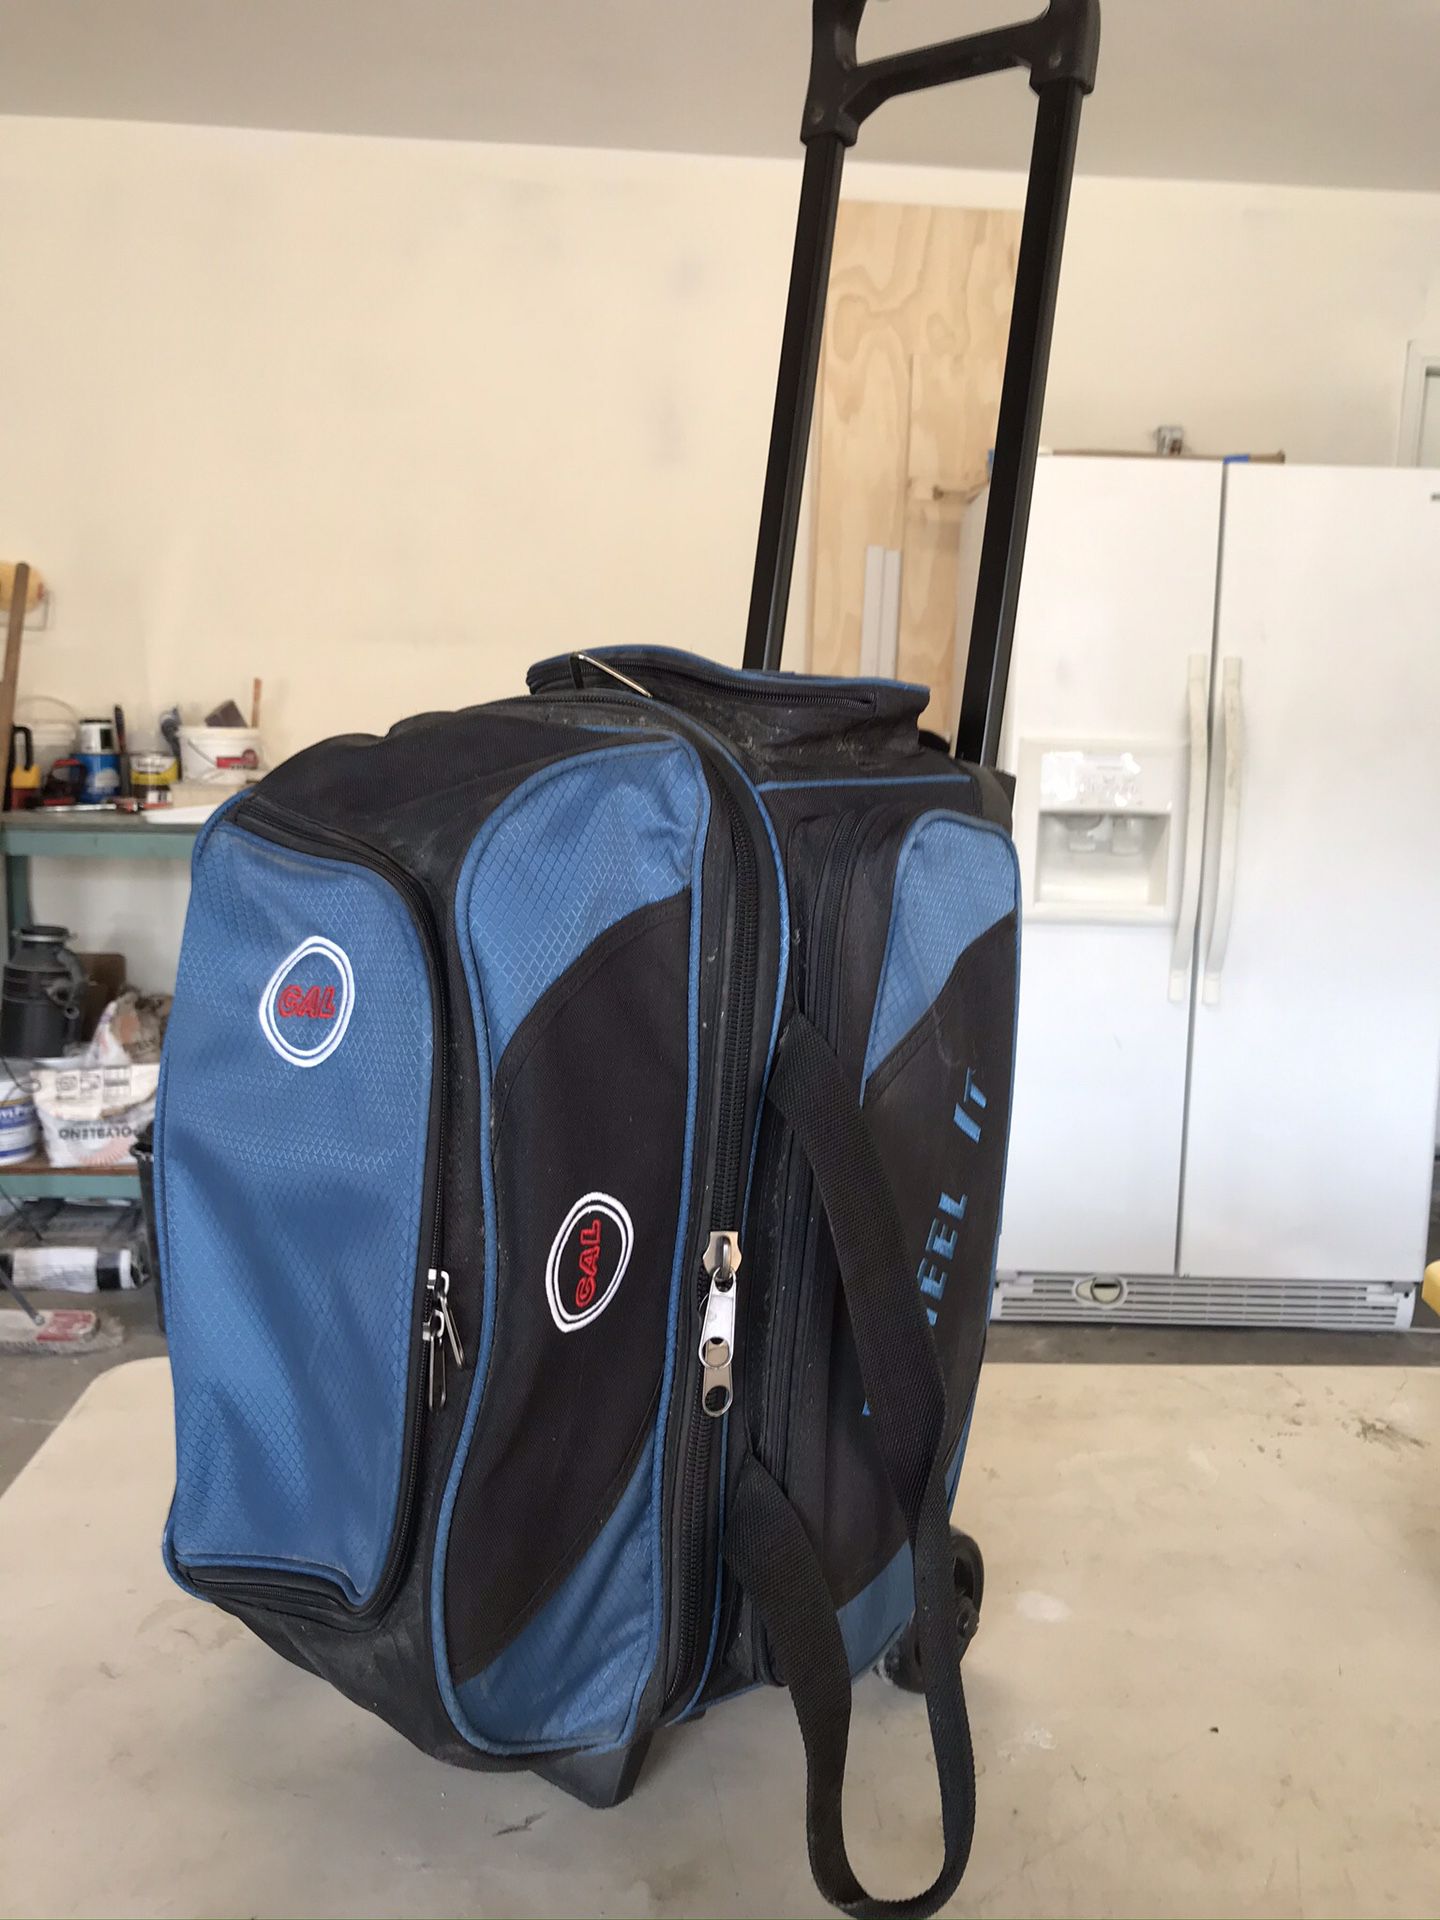 Two bowling balls in a double rolling bag